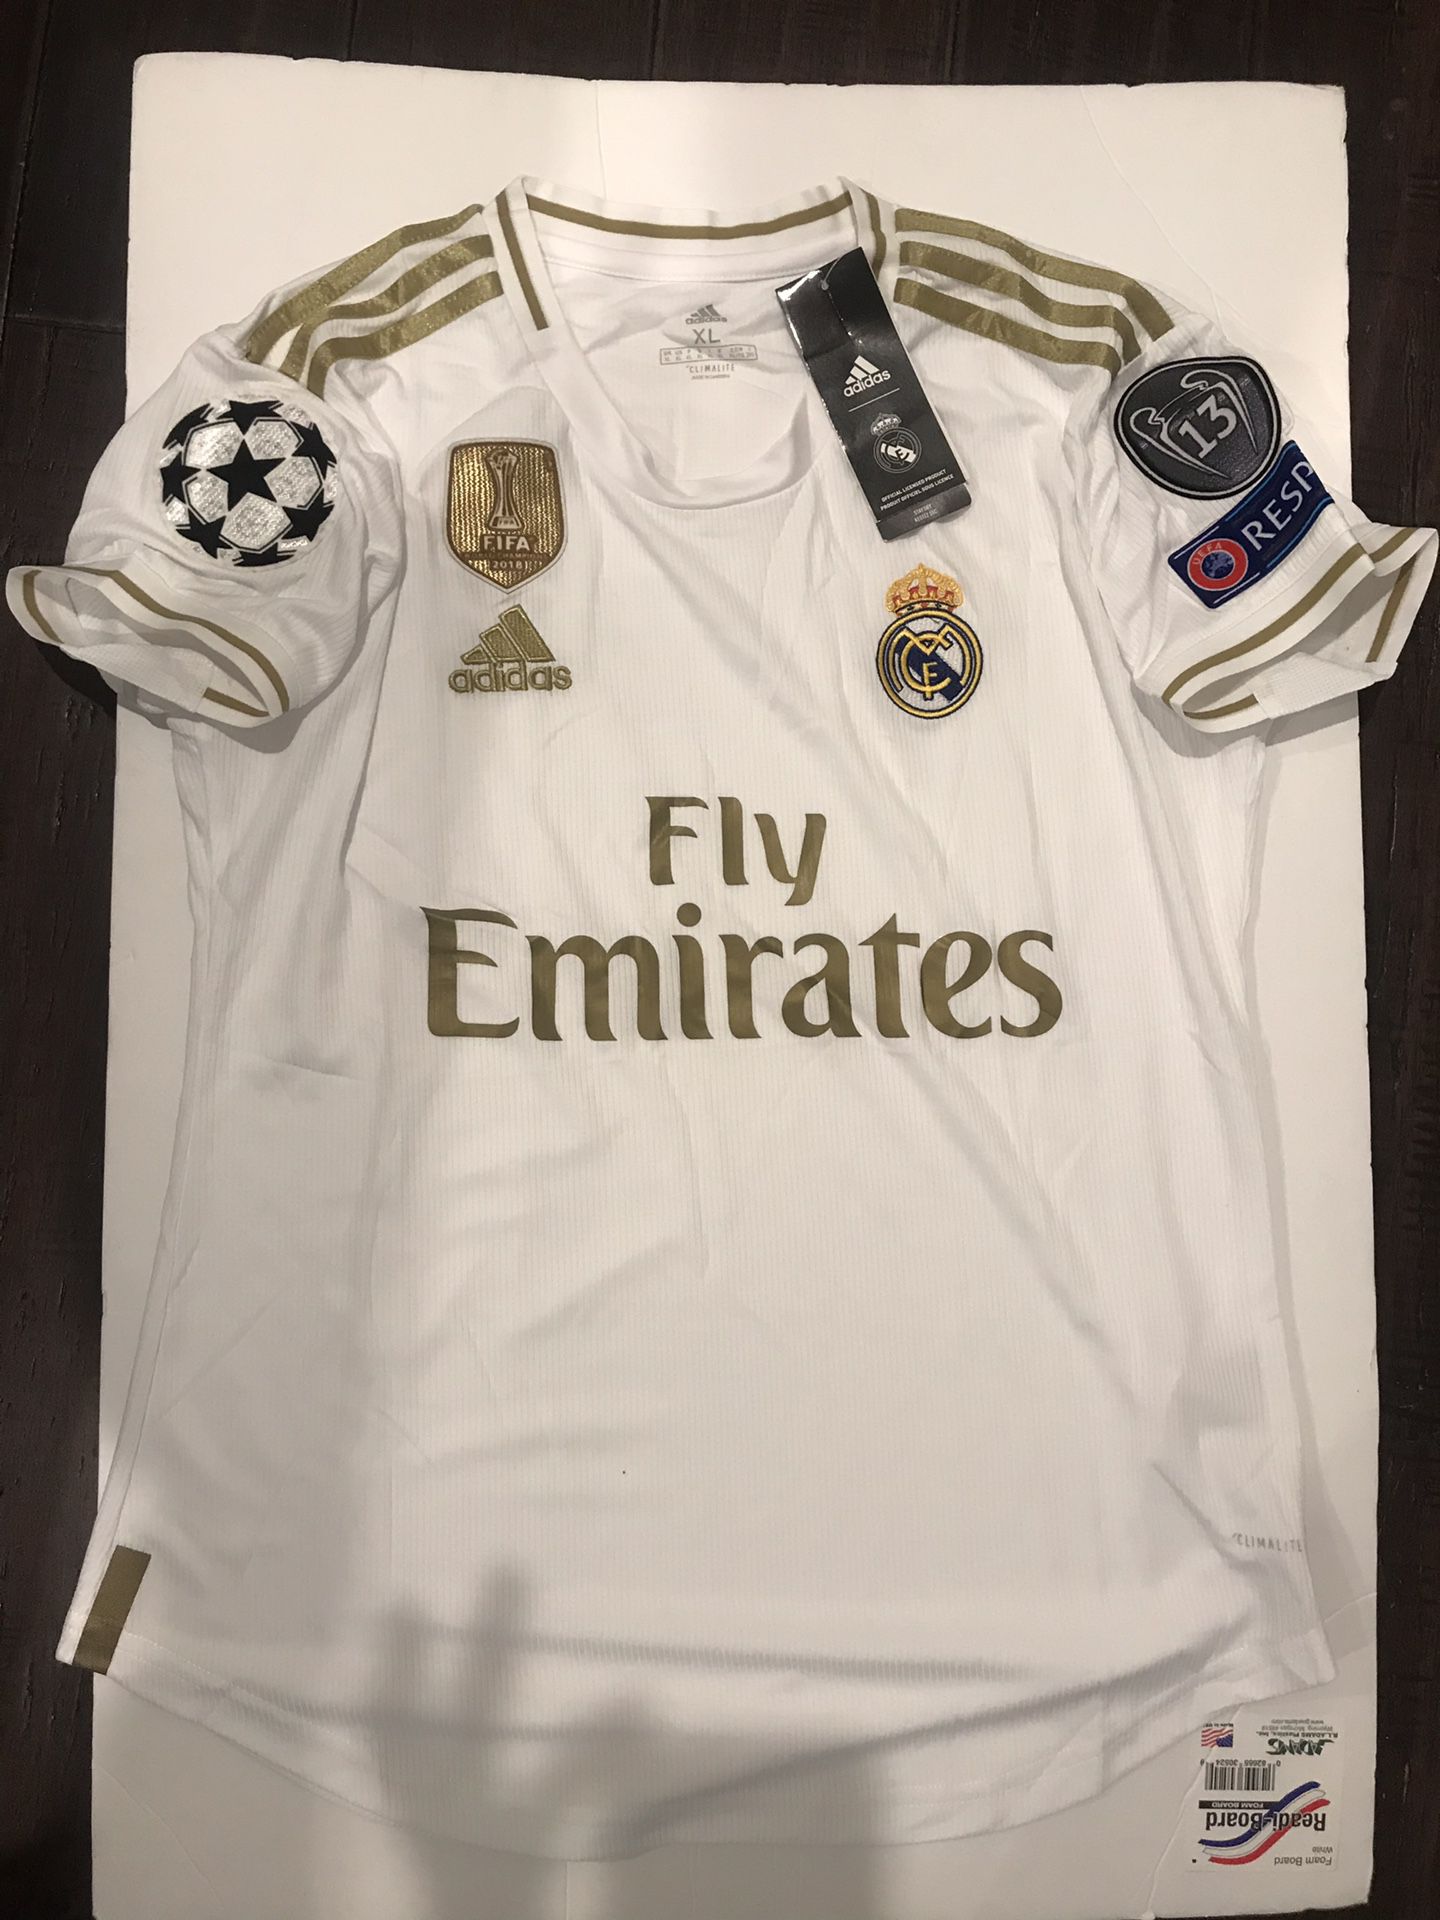 19/20 Real Madrid Adult women’s soccer jersey